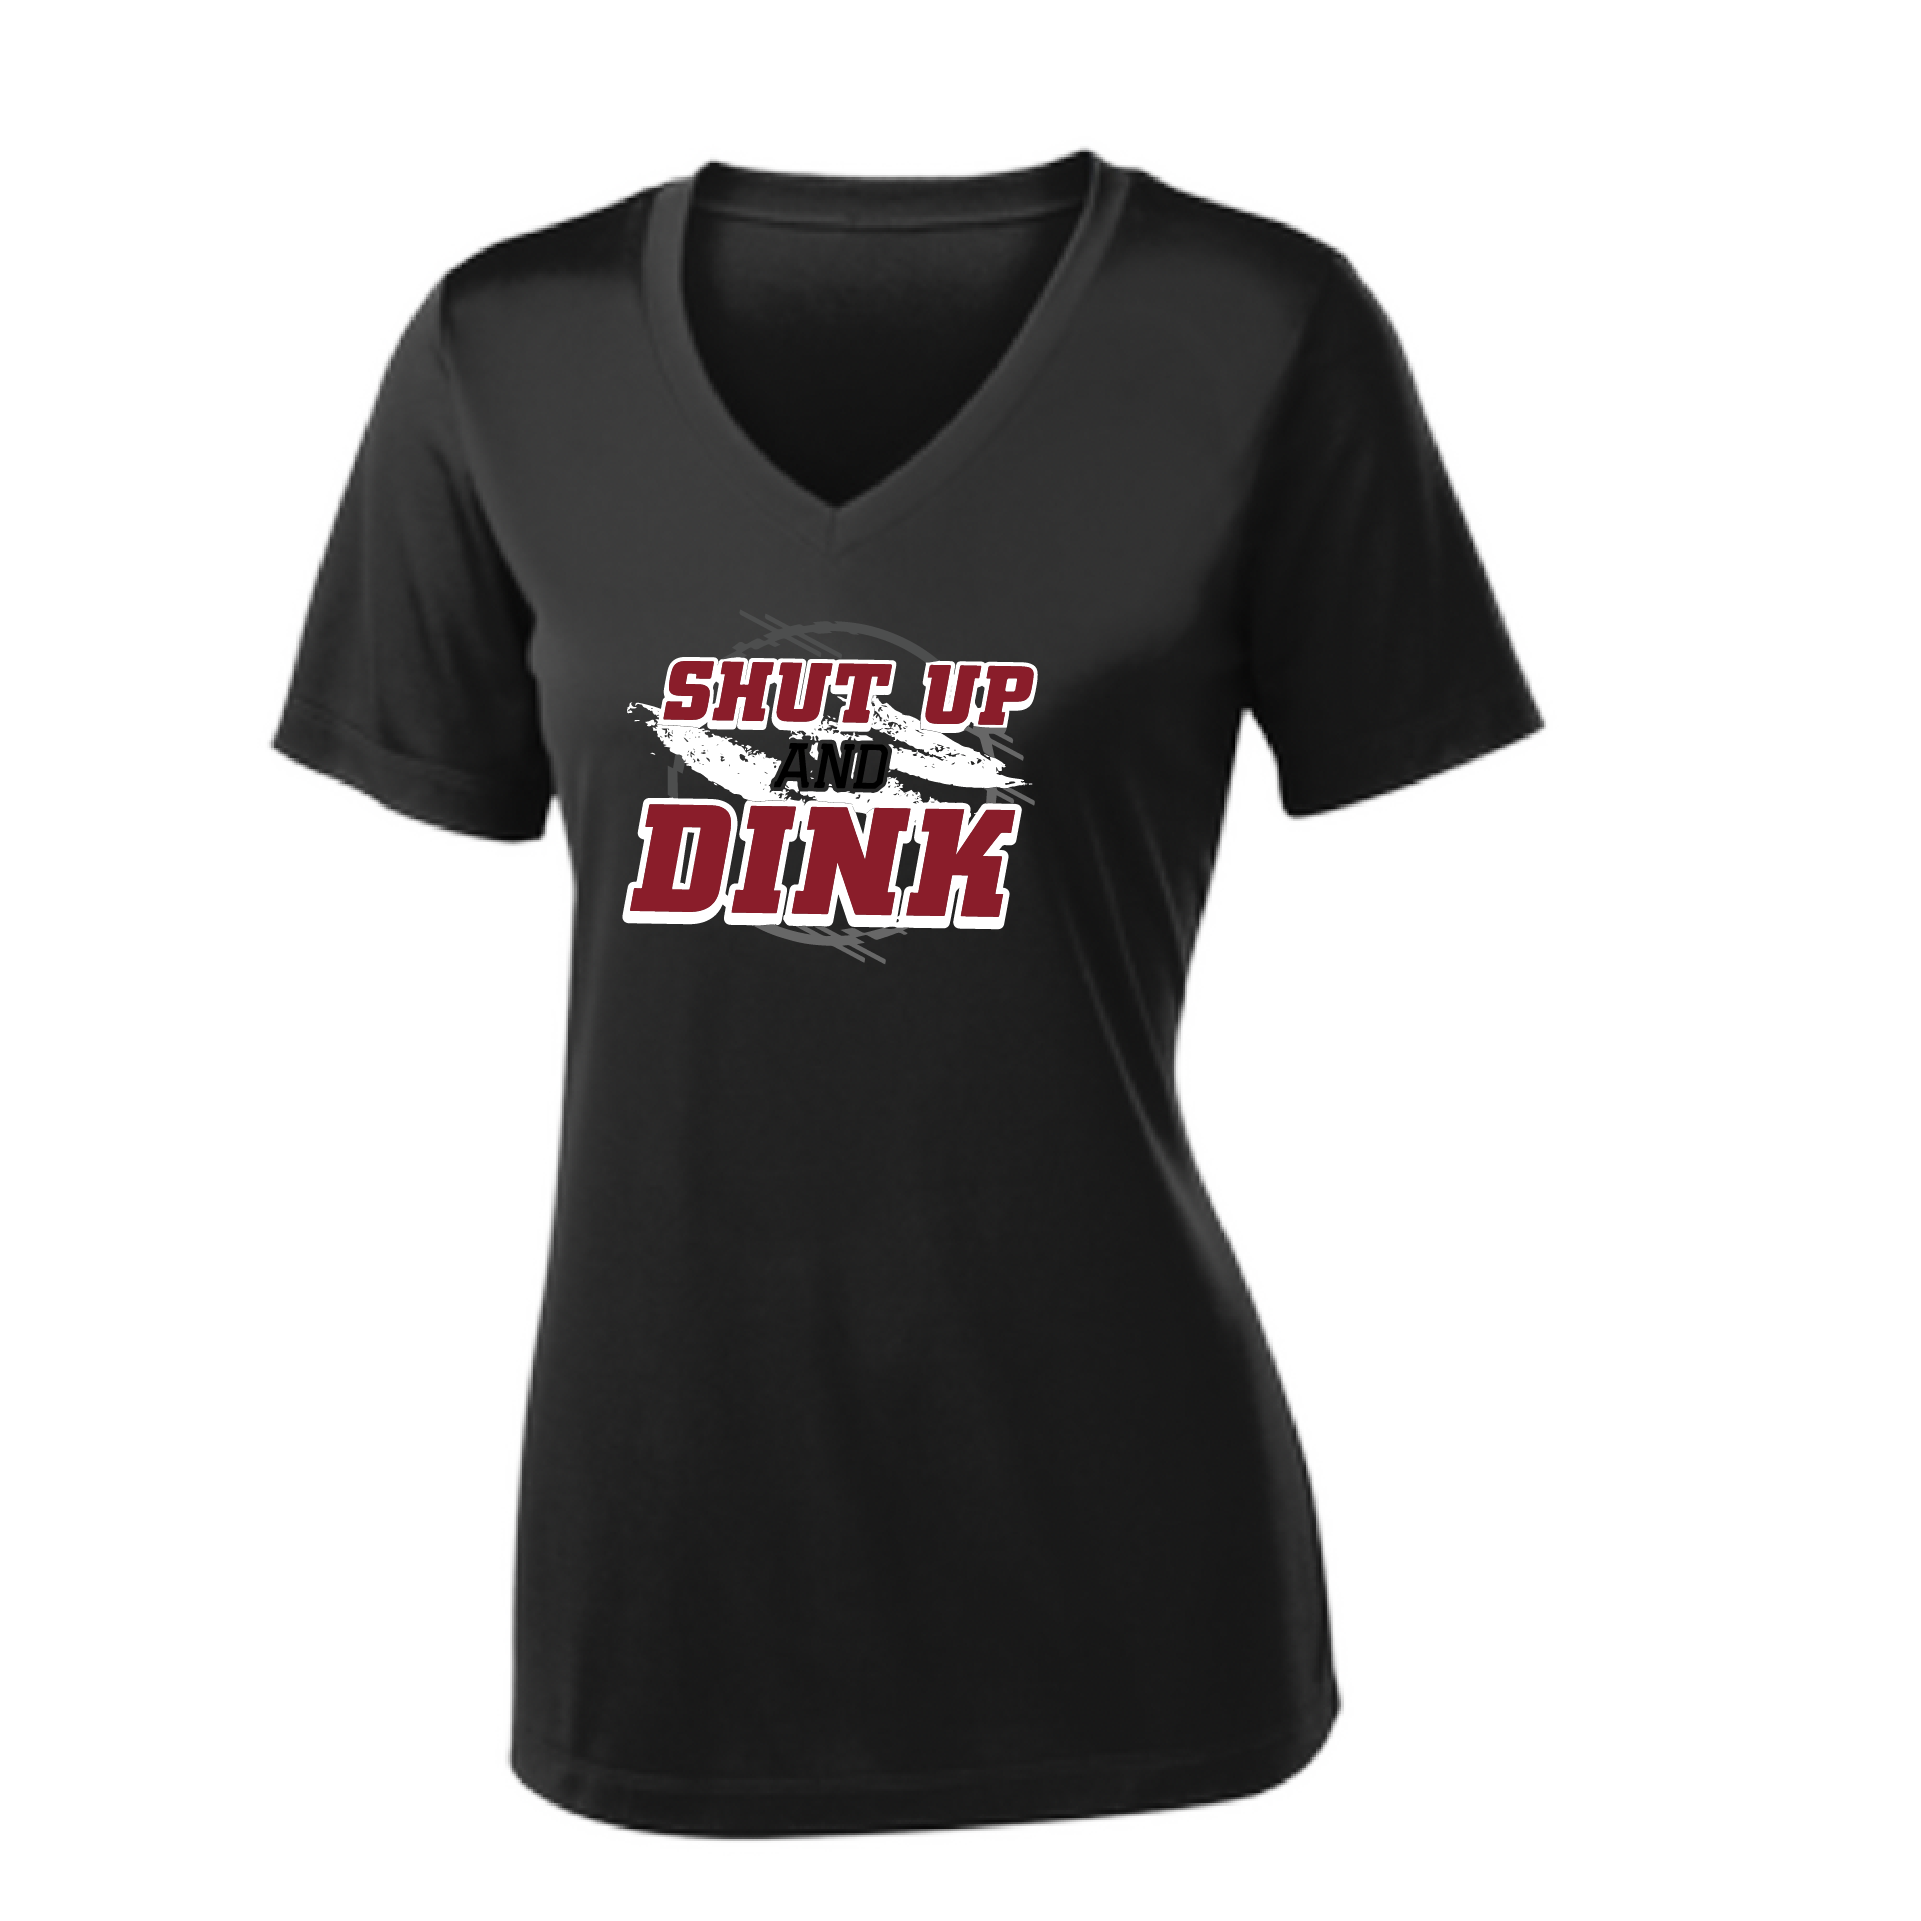 Pickleball Design: Shut up and Dink  Women's Styles: Short-Sleeve V-Neck  Turn up the volume in this Women's shirt with its perfect mix of softness and attitude. Material is ultra-comfortable with moisture wicking properties and tri-blend softness. PosiCharge technology locks in color. Highly breathable and lightweight.